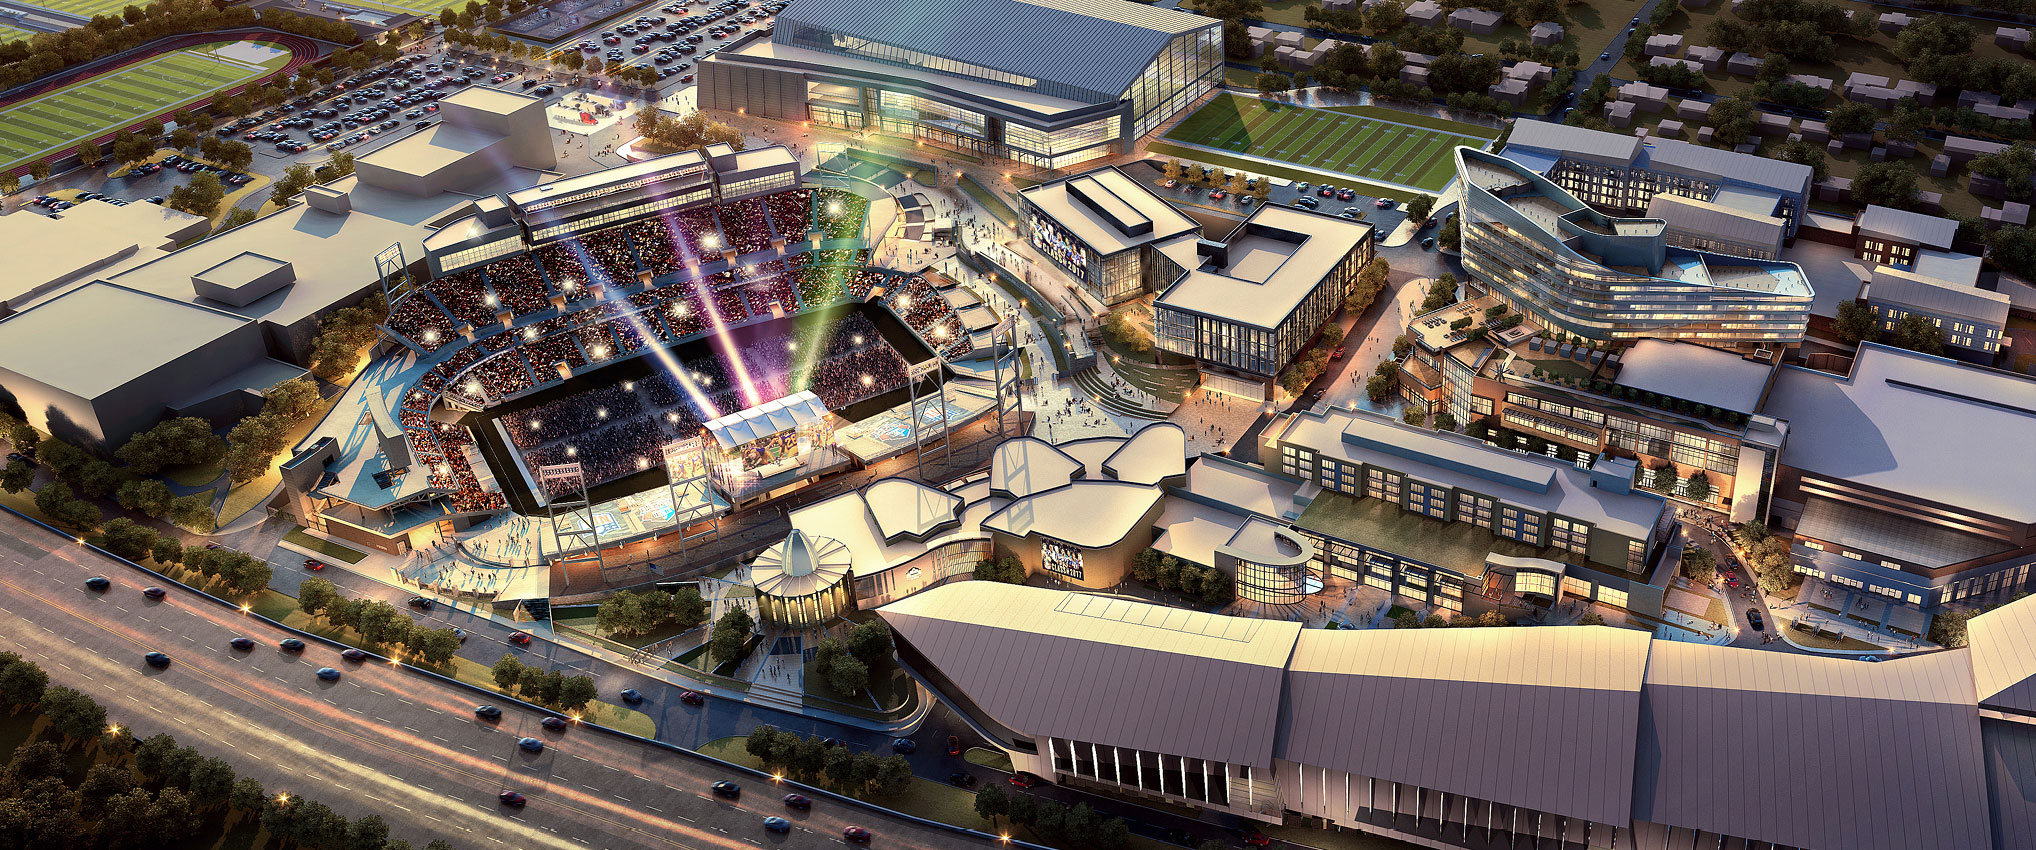 Forbes Describes HKS-Designed Pro Football Hall Of Fame’s $700 Million Expansion as Disney For Football Fans